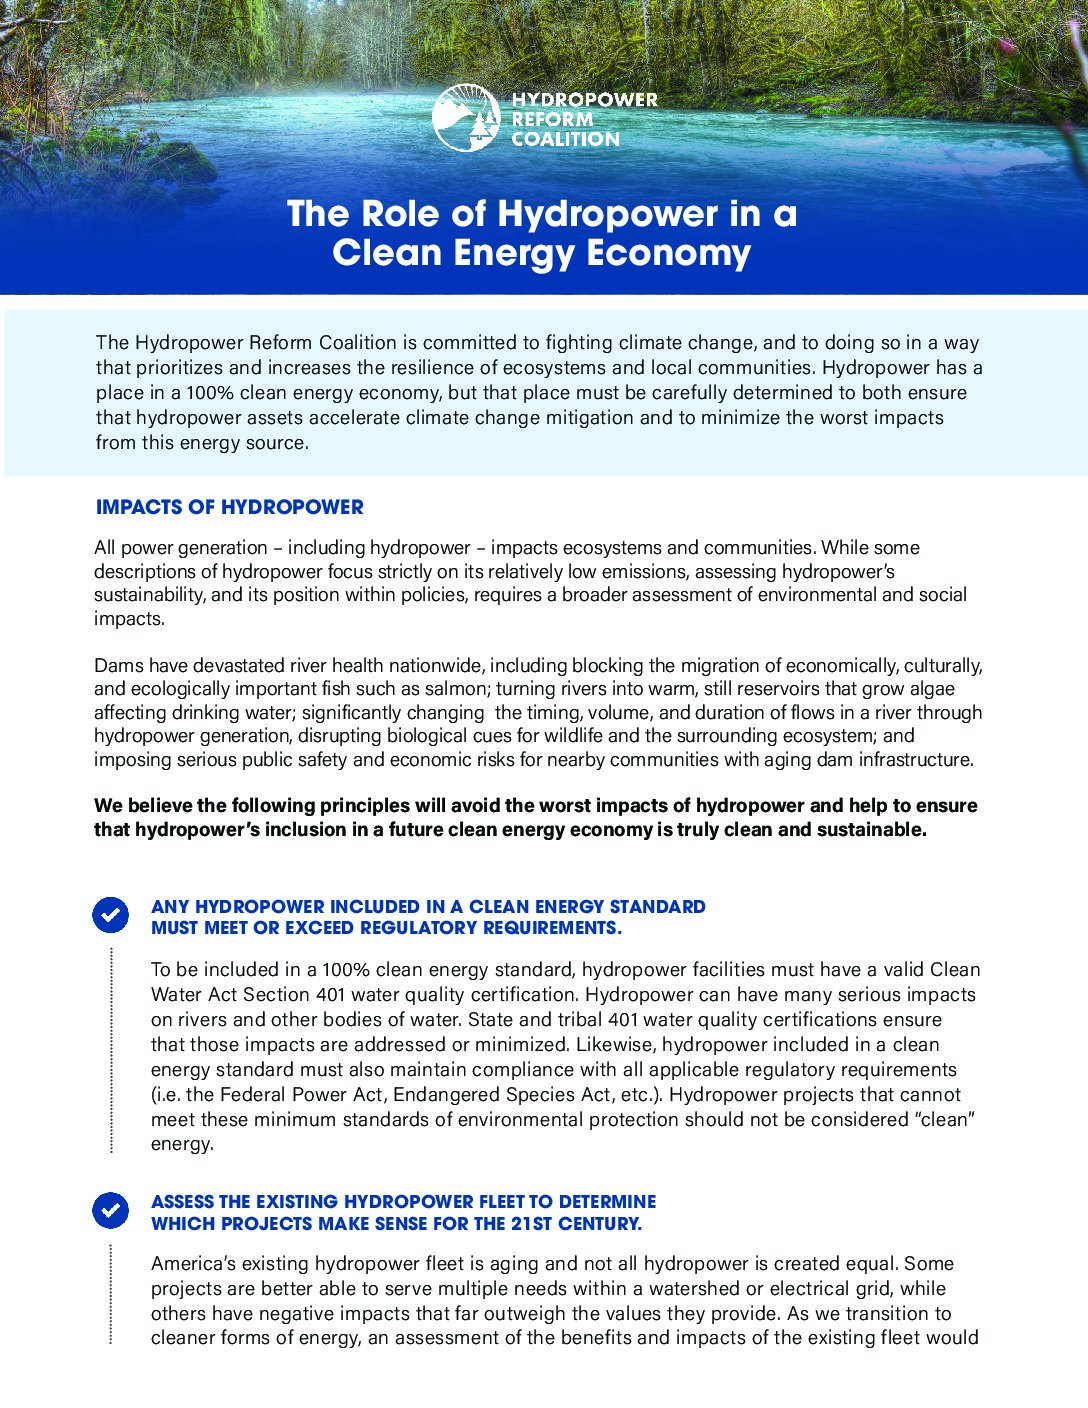 The Role of Hydropower in a Clean Energy Economy